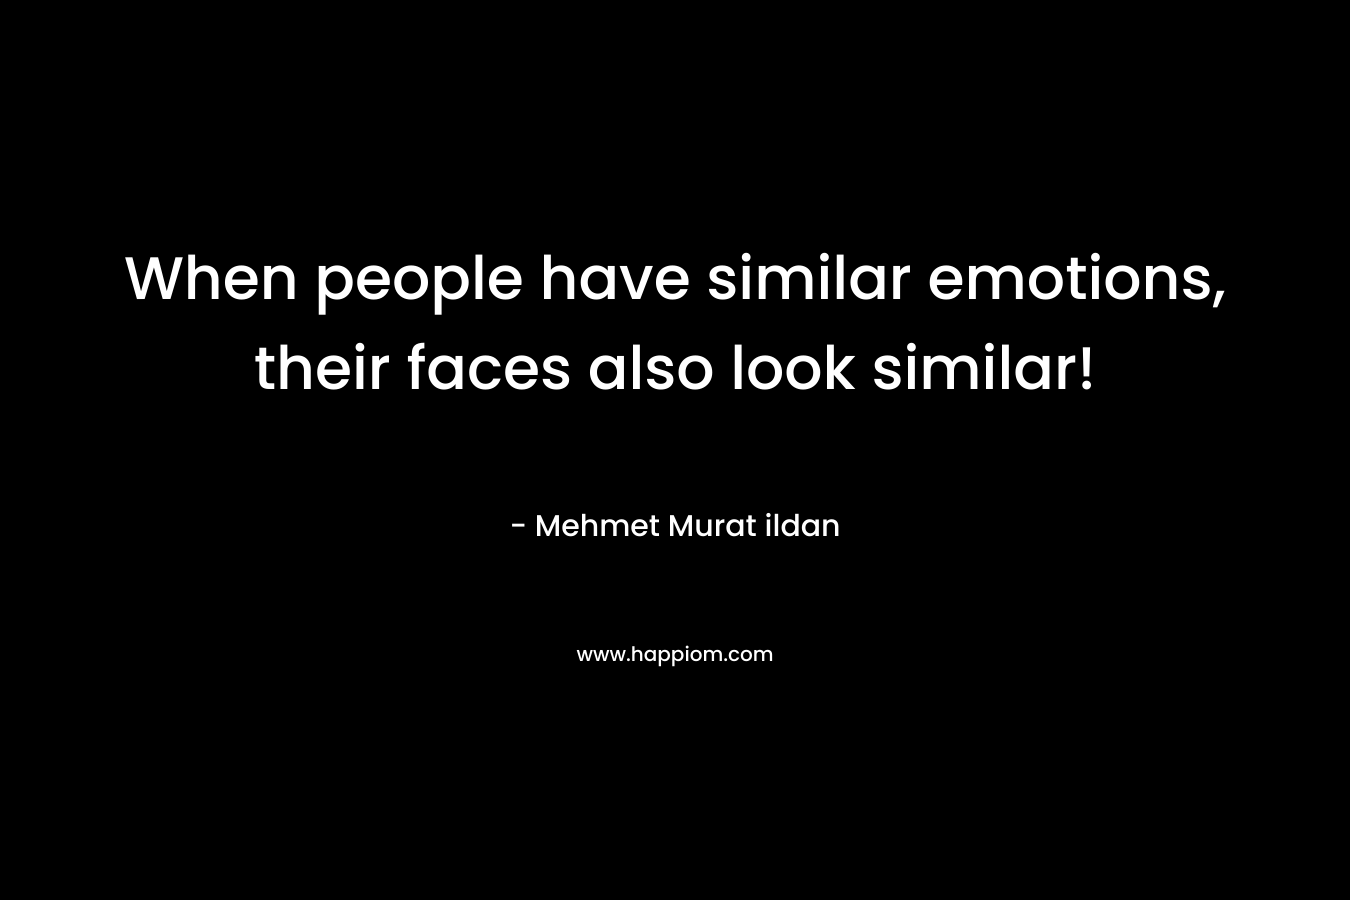 When people have similar emotions, their faces also look similar!